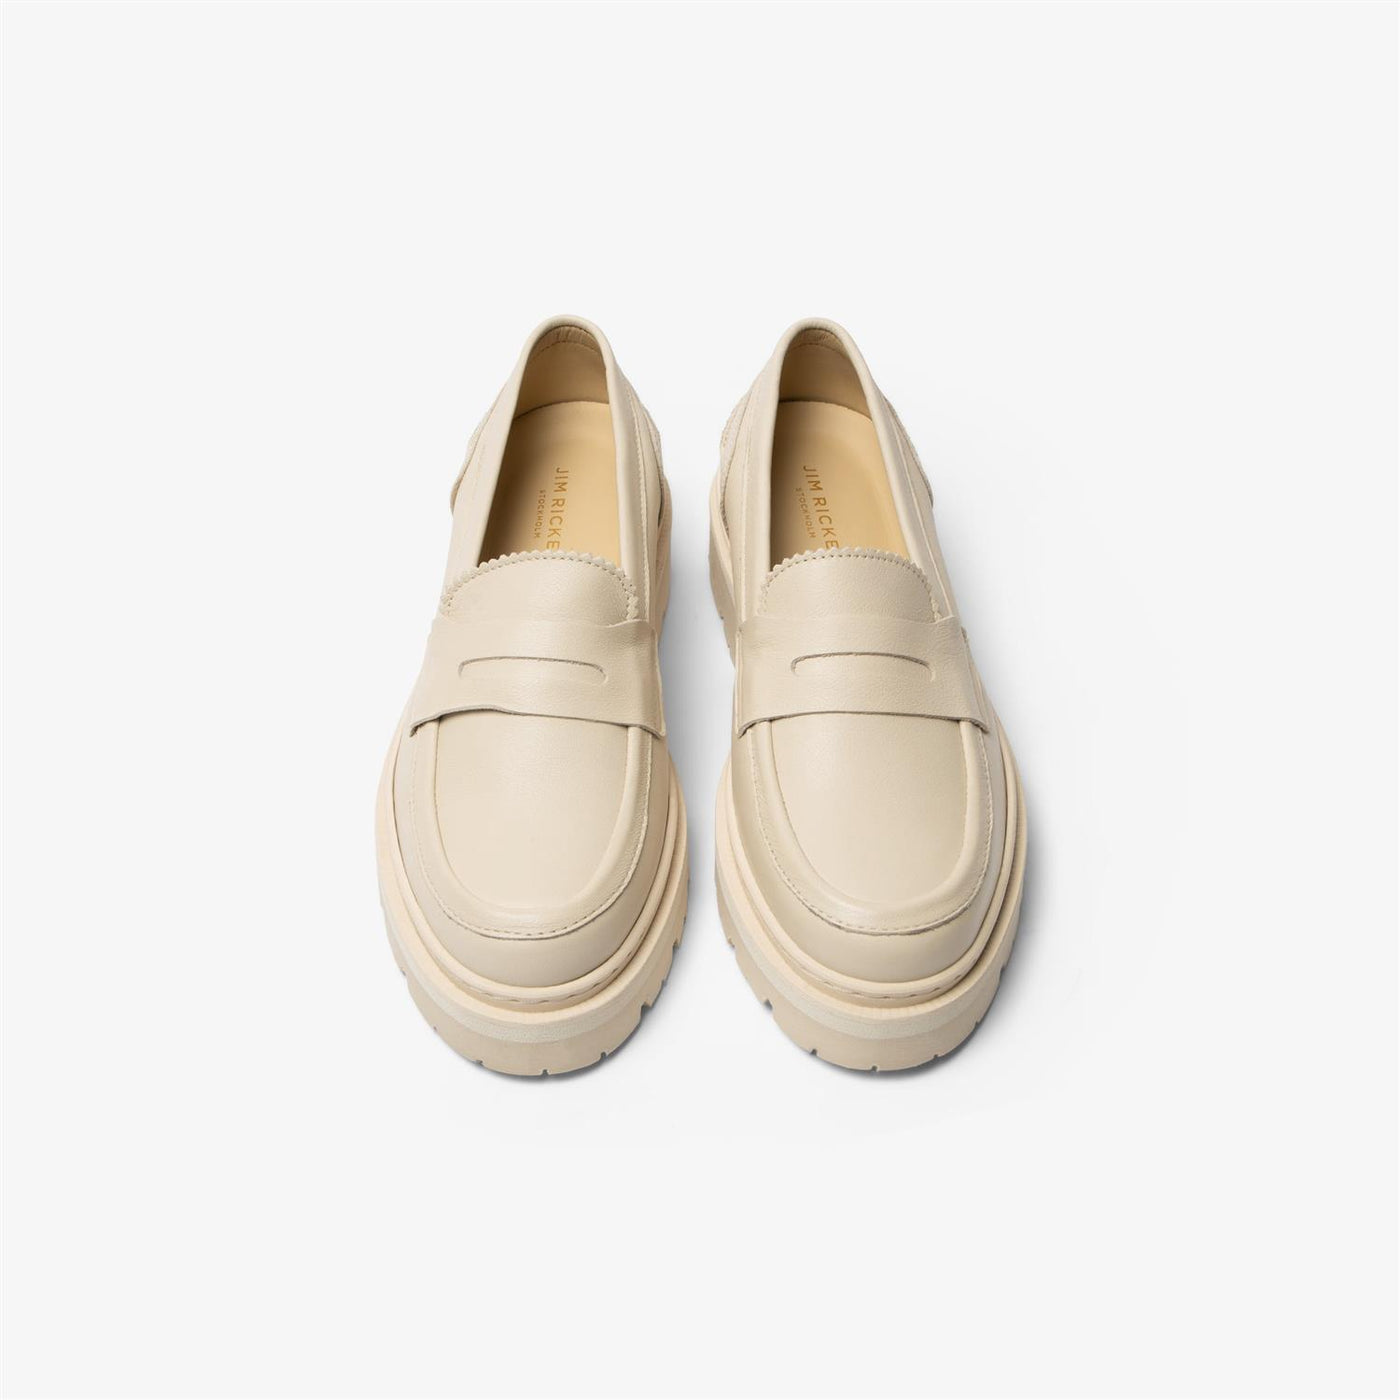 PENNY LOAFER Cream